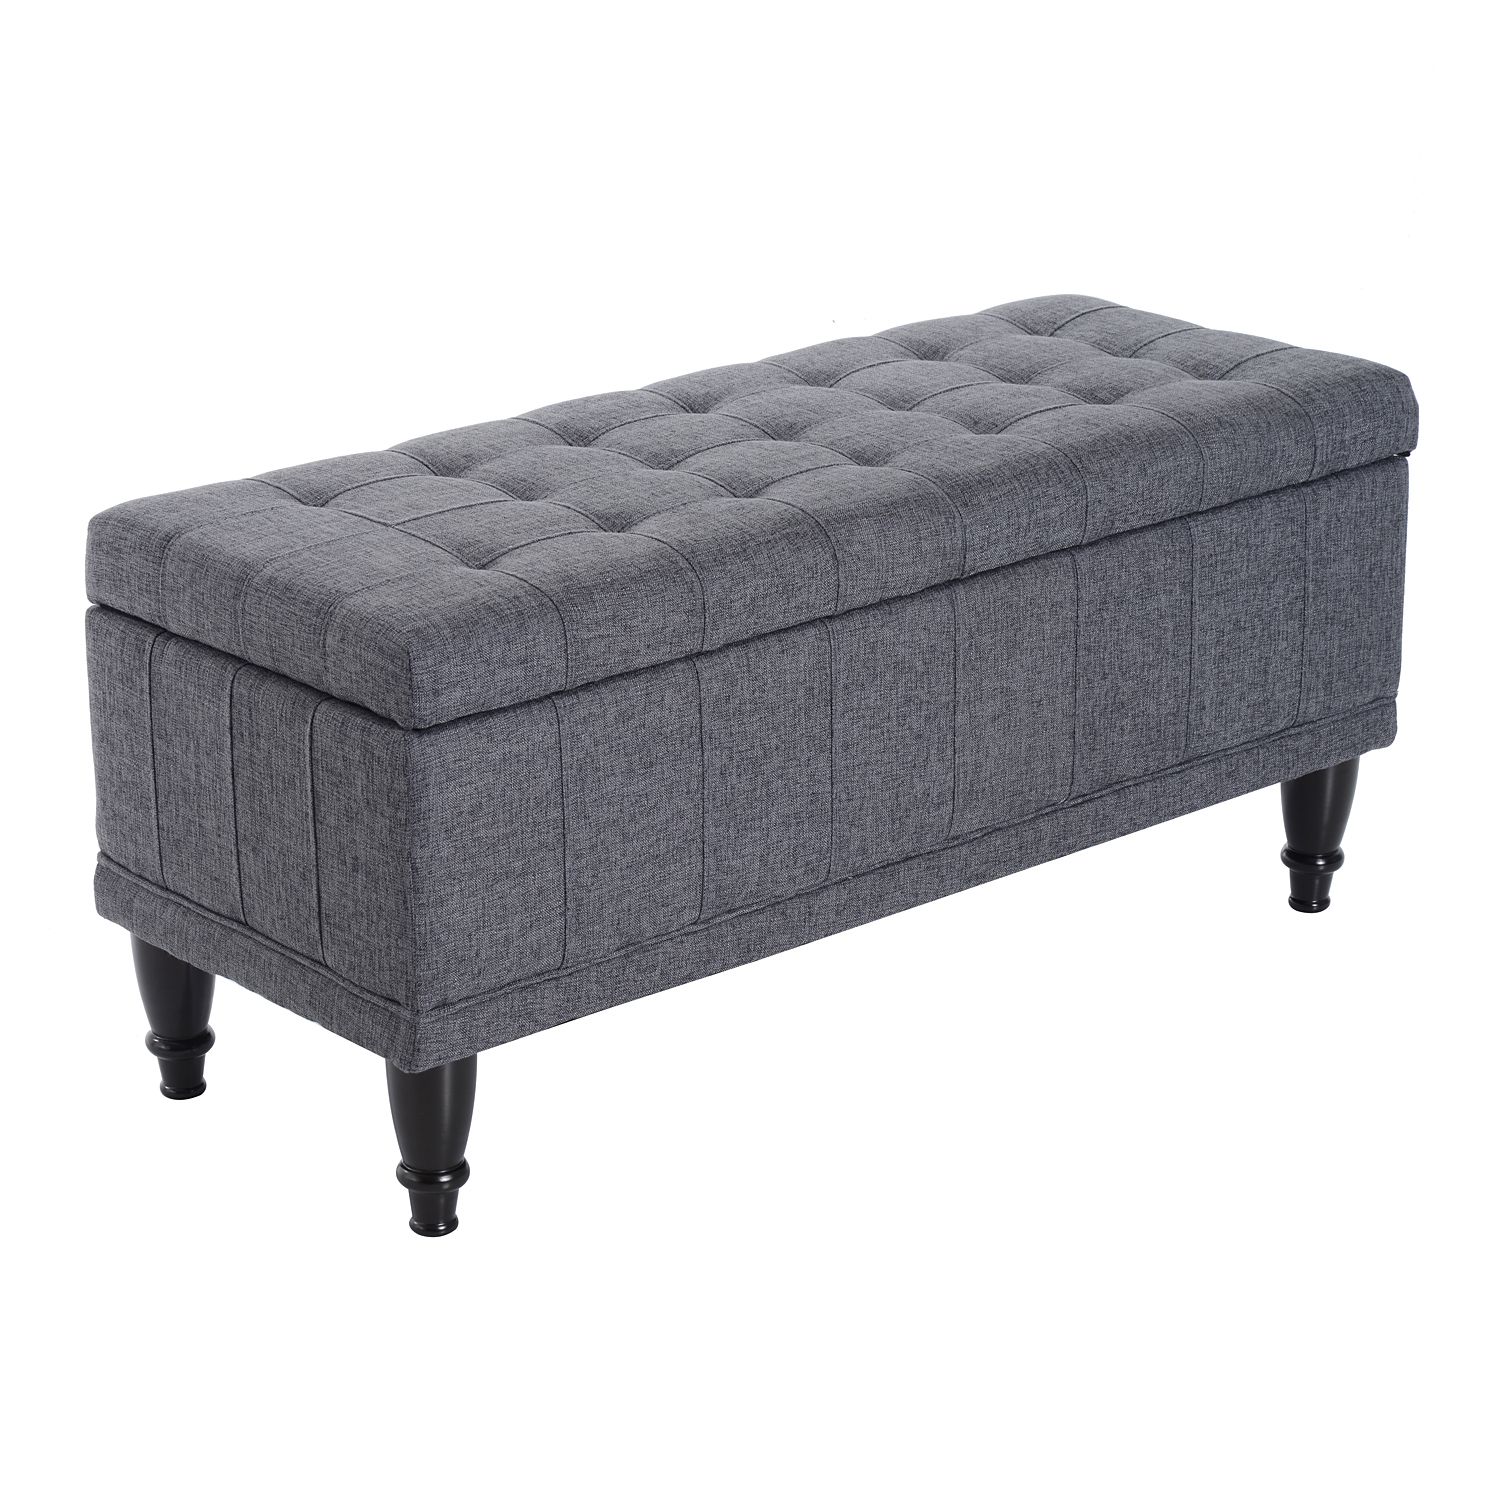 Large 42" Tufted Linen Fabric Ottoman Storage Bench – Dark Heather Grey In Tufted Fabric Ottomans (View 6 of 20)